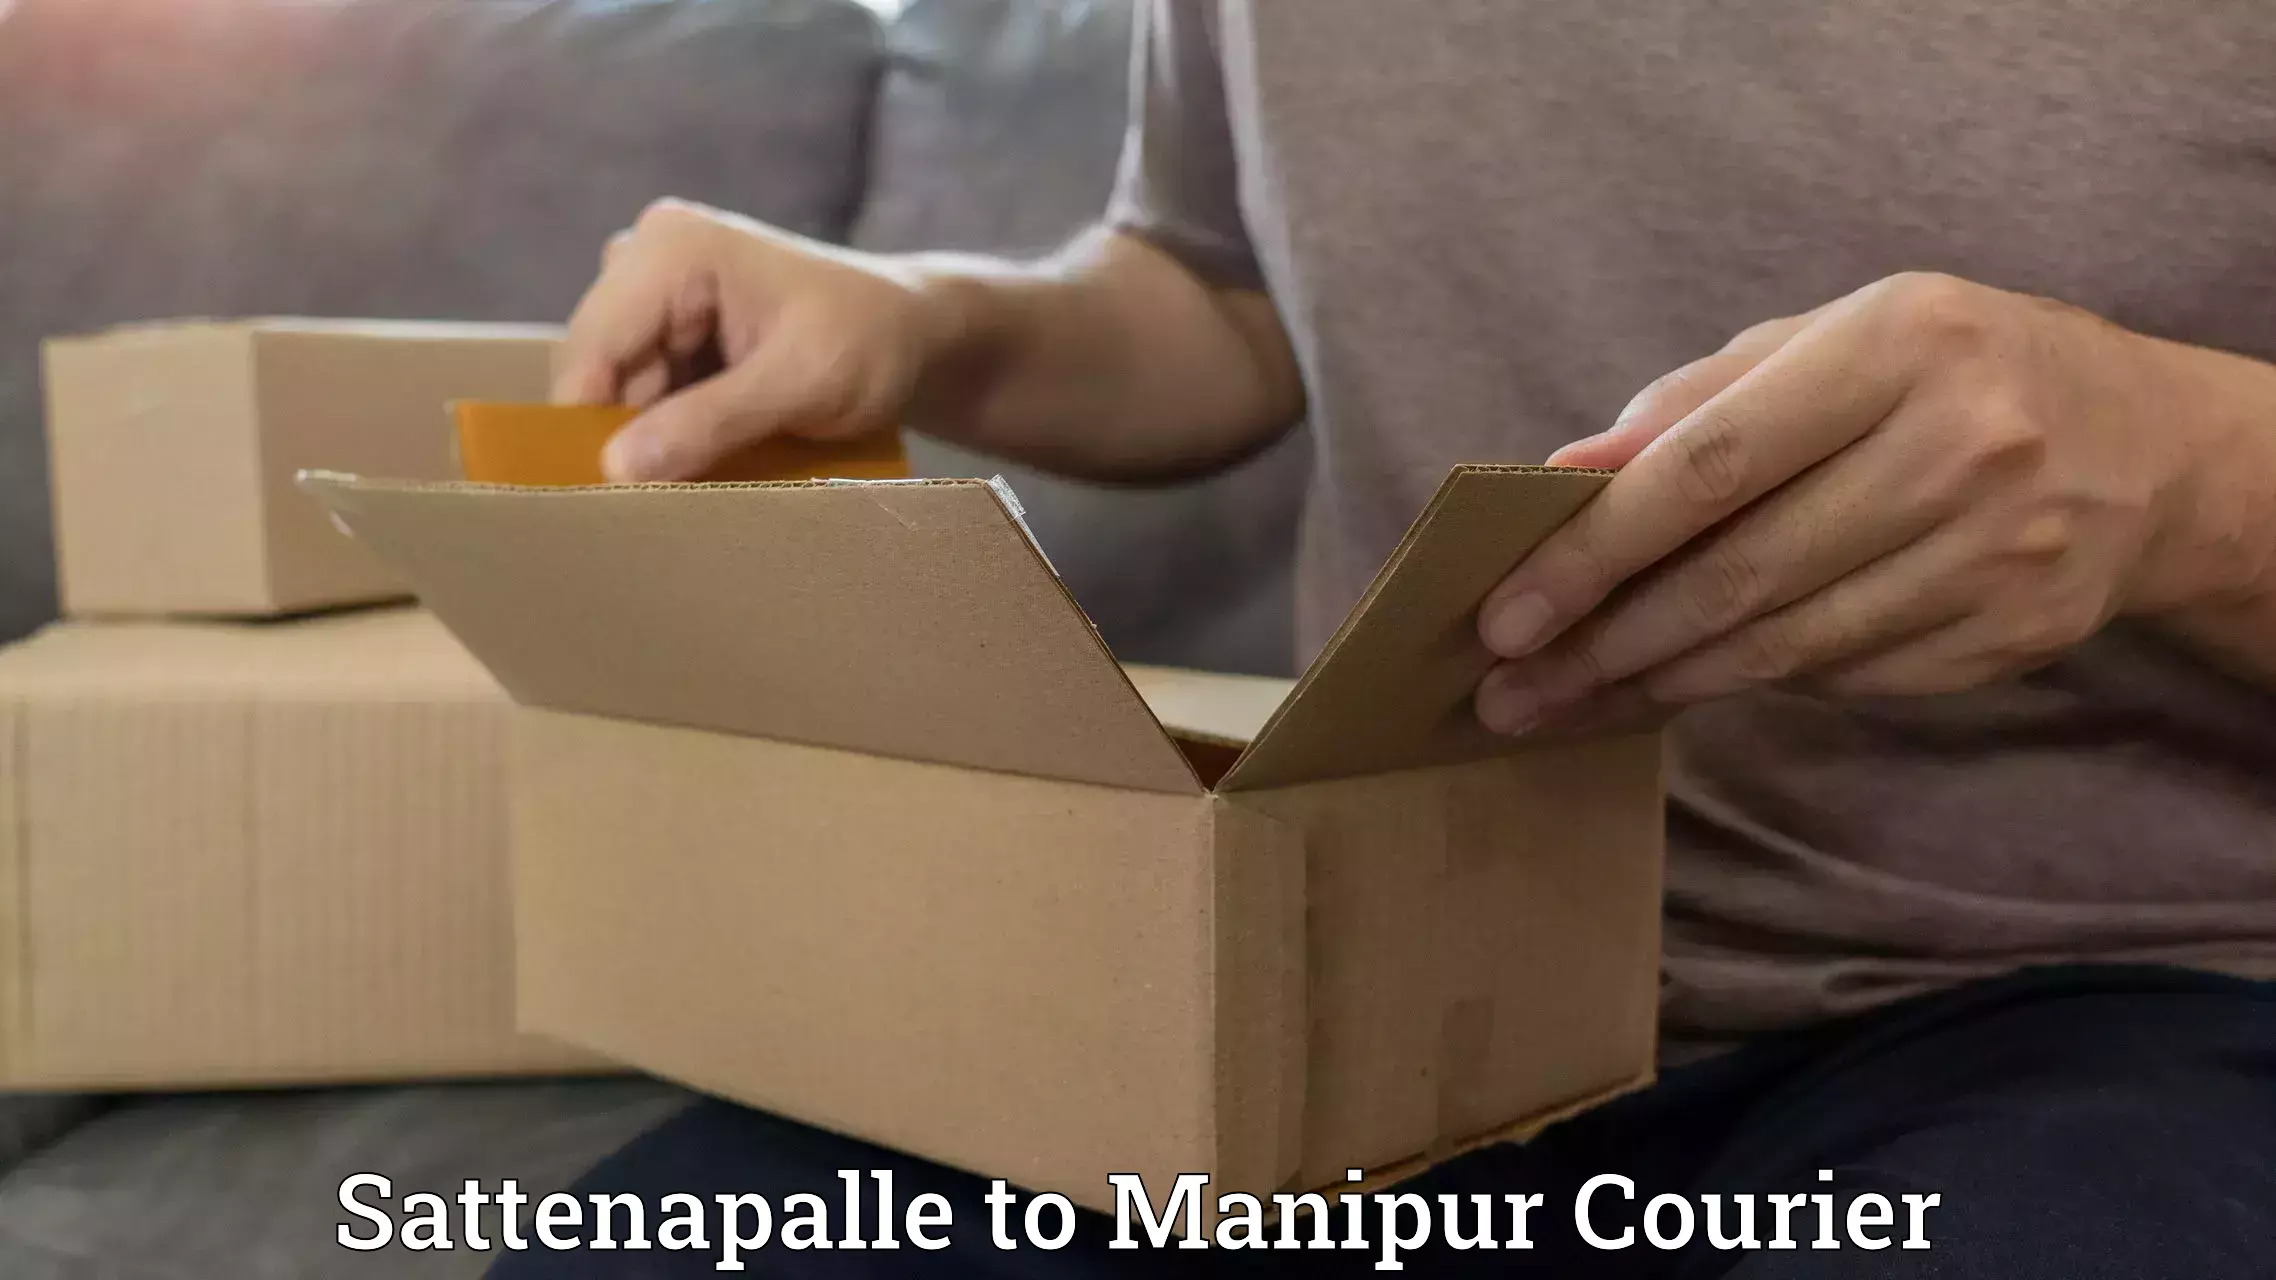 Courier service innovation Sattenapalle to Senapati